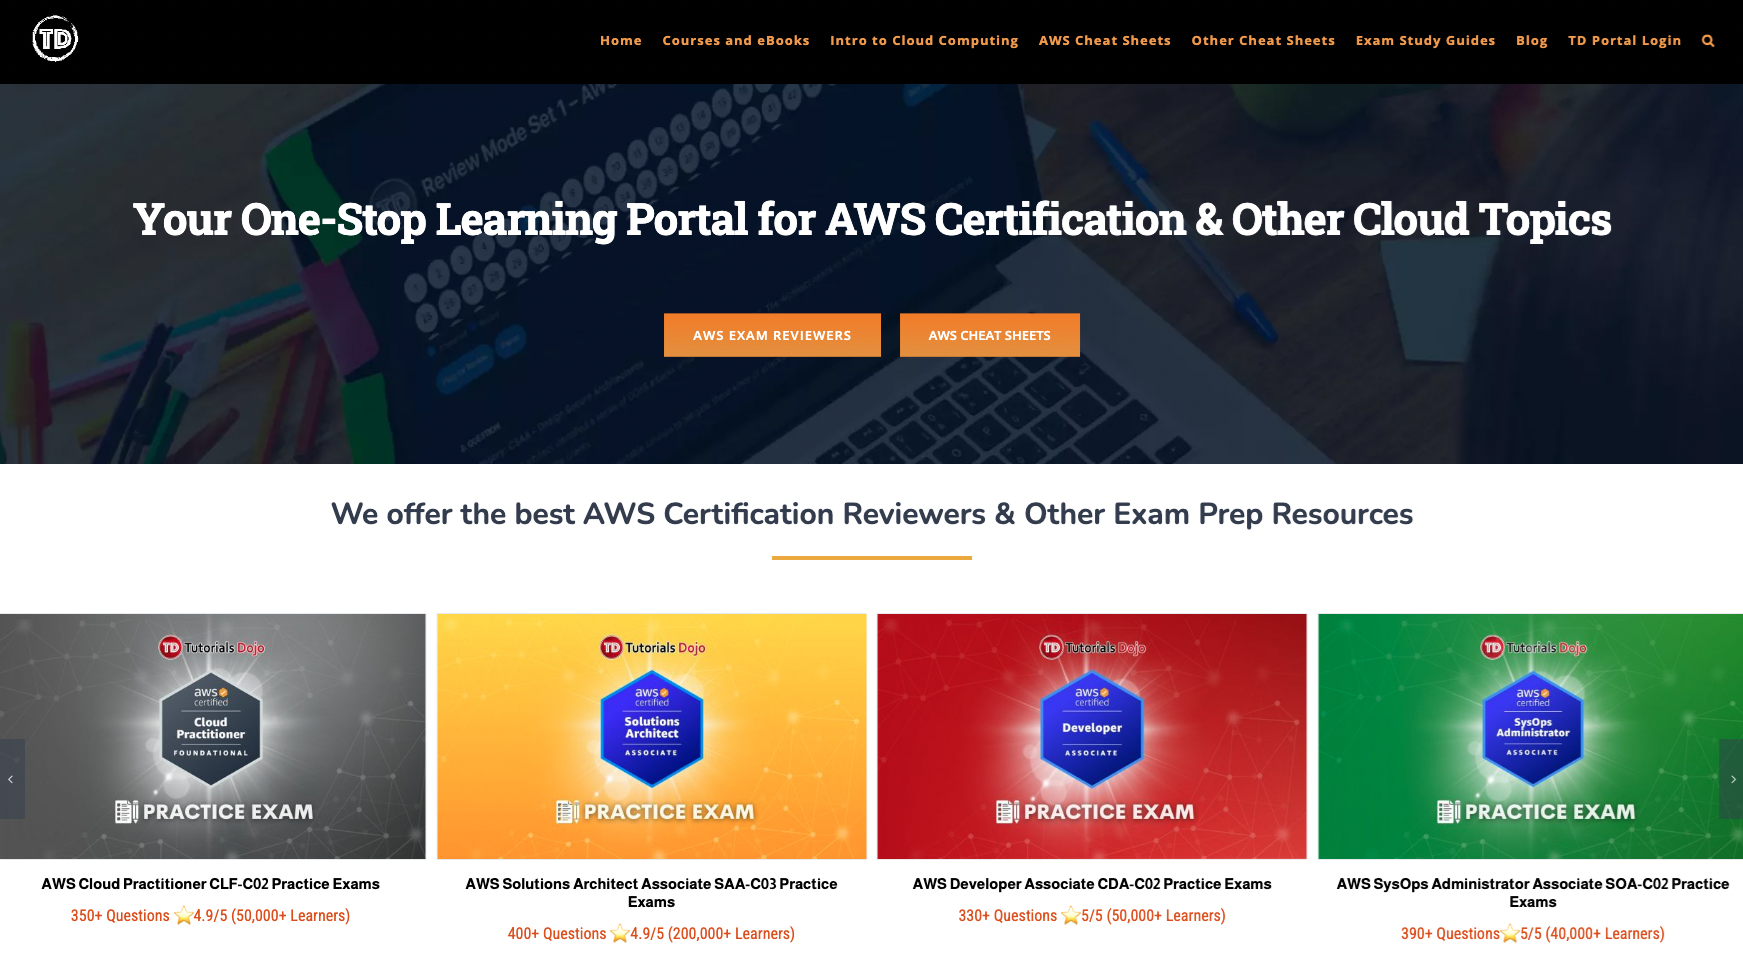 AWS Cloud Practitioner CLF-C02 Exam Experience as a Data Scientist